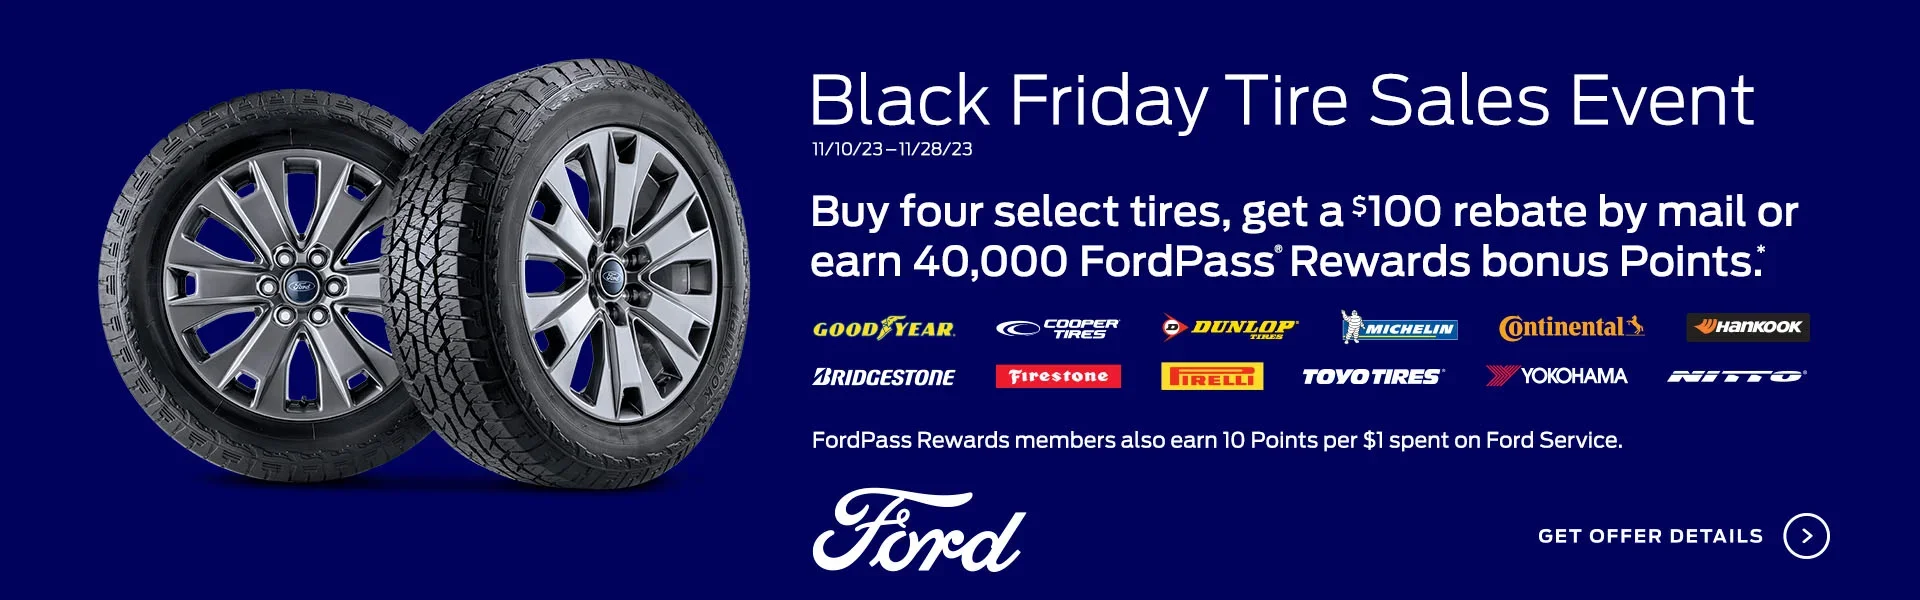 Black Friday Tire Sales Event